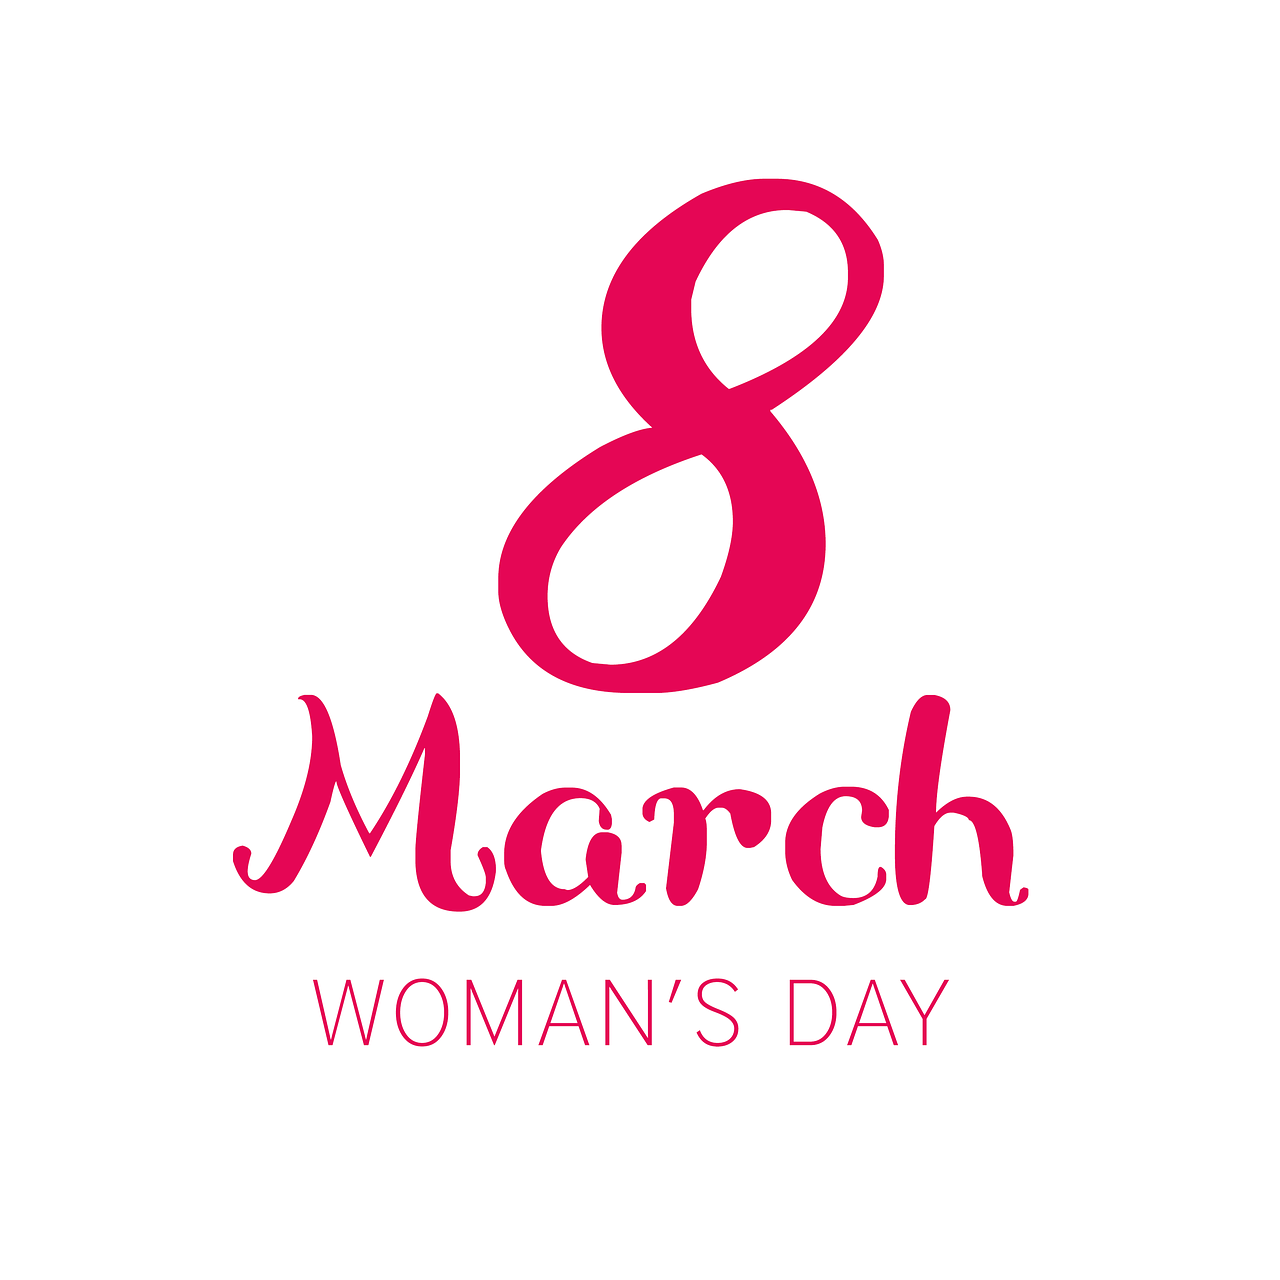 women's day 8 march 8 free photo